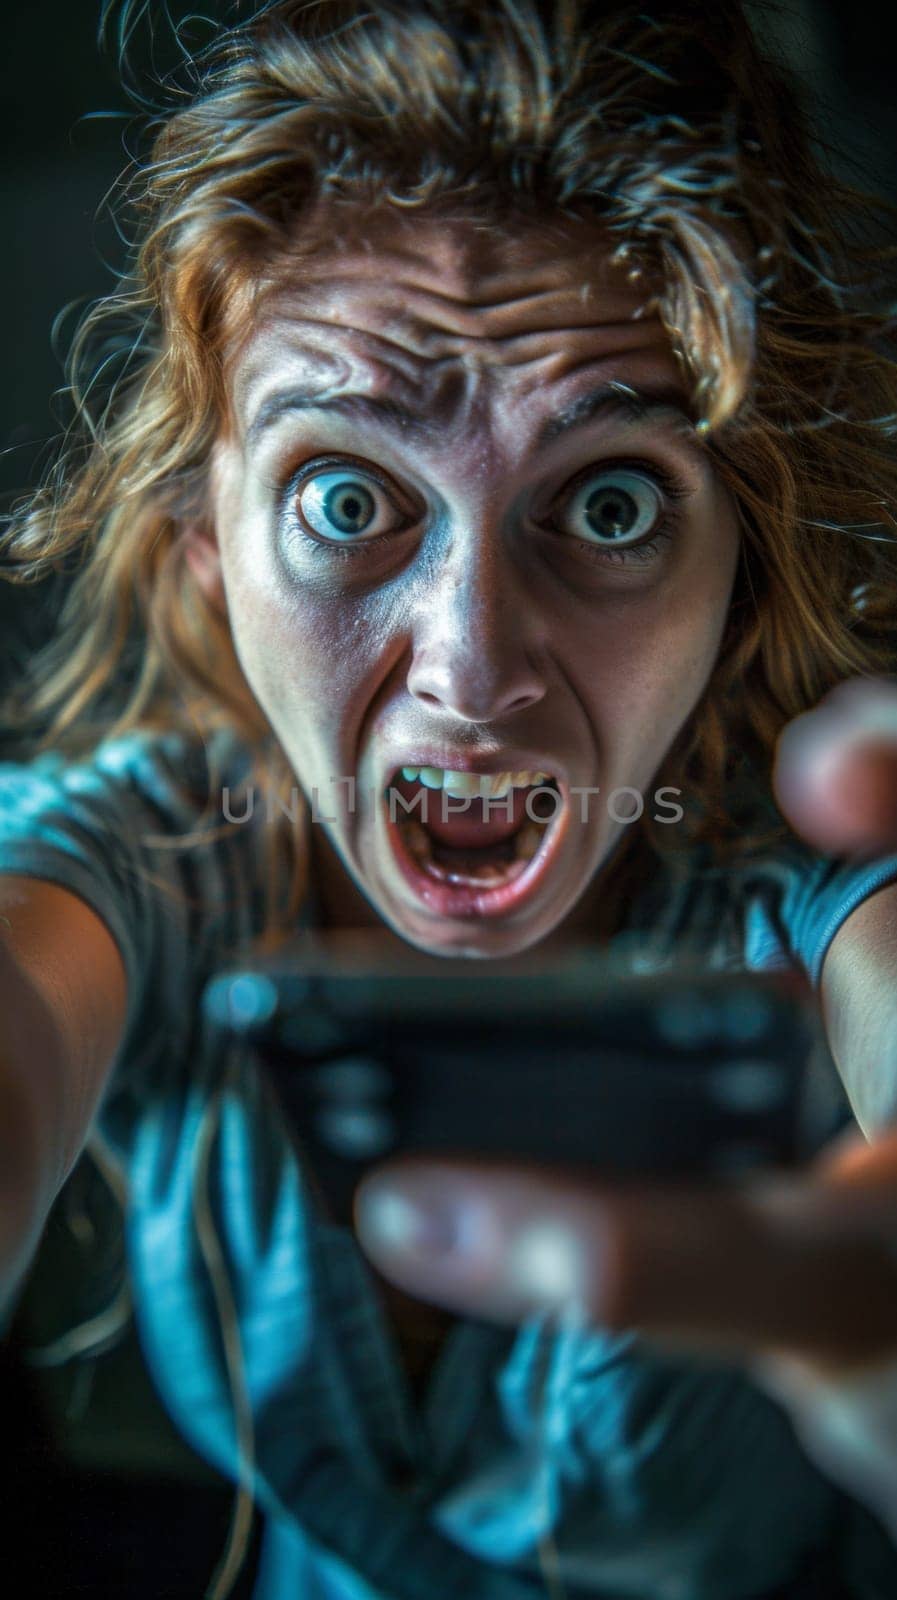 A woman holding a cell phone in her hand with an angry look on her face